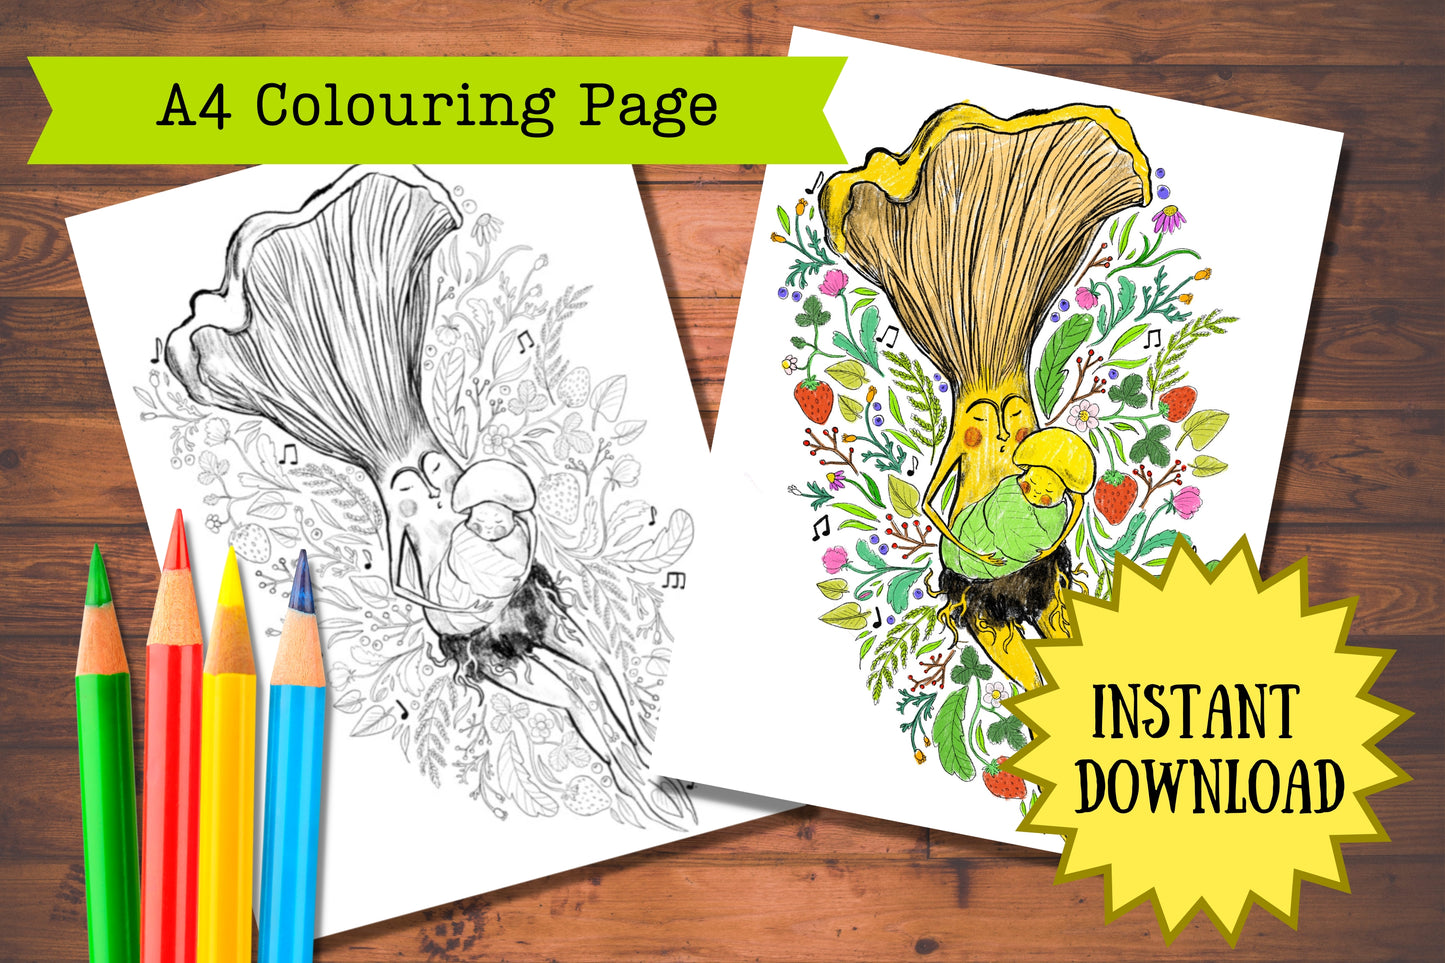 Anna Seed Art | Printable Colouring Page - Mama's Lullaby (DIGITAL DOWNLOAD)